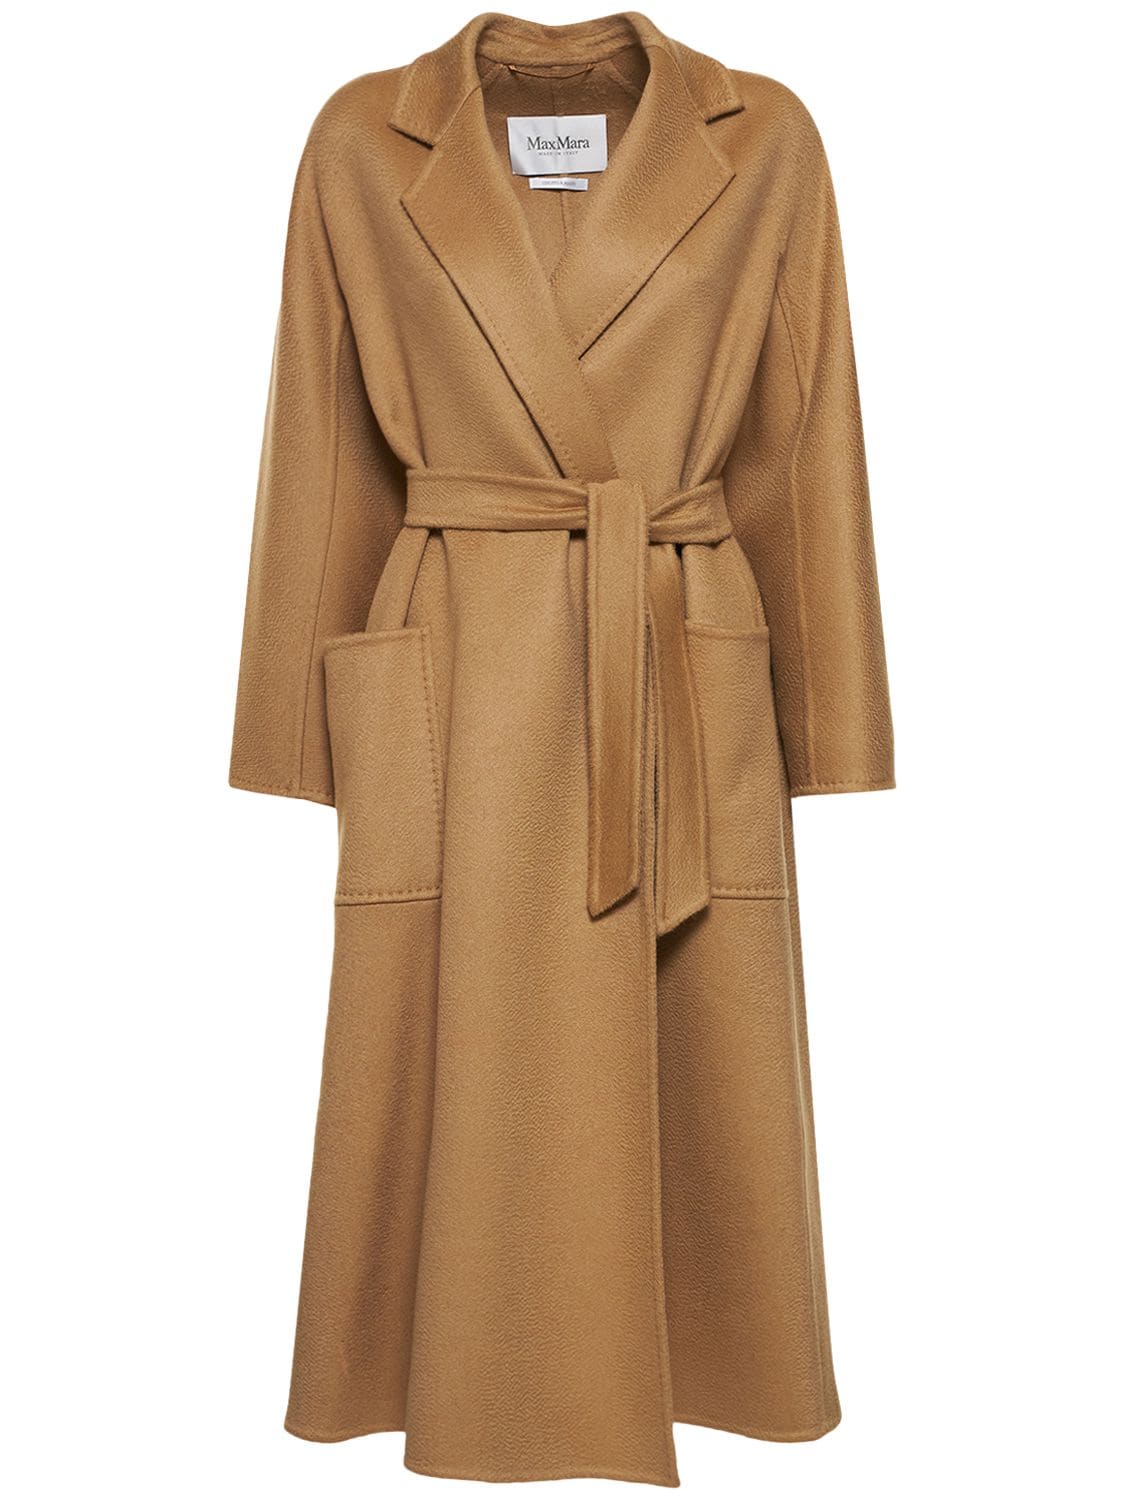 MAX MARA LUDMILLA BELTED CASHMERE LONG COAT